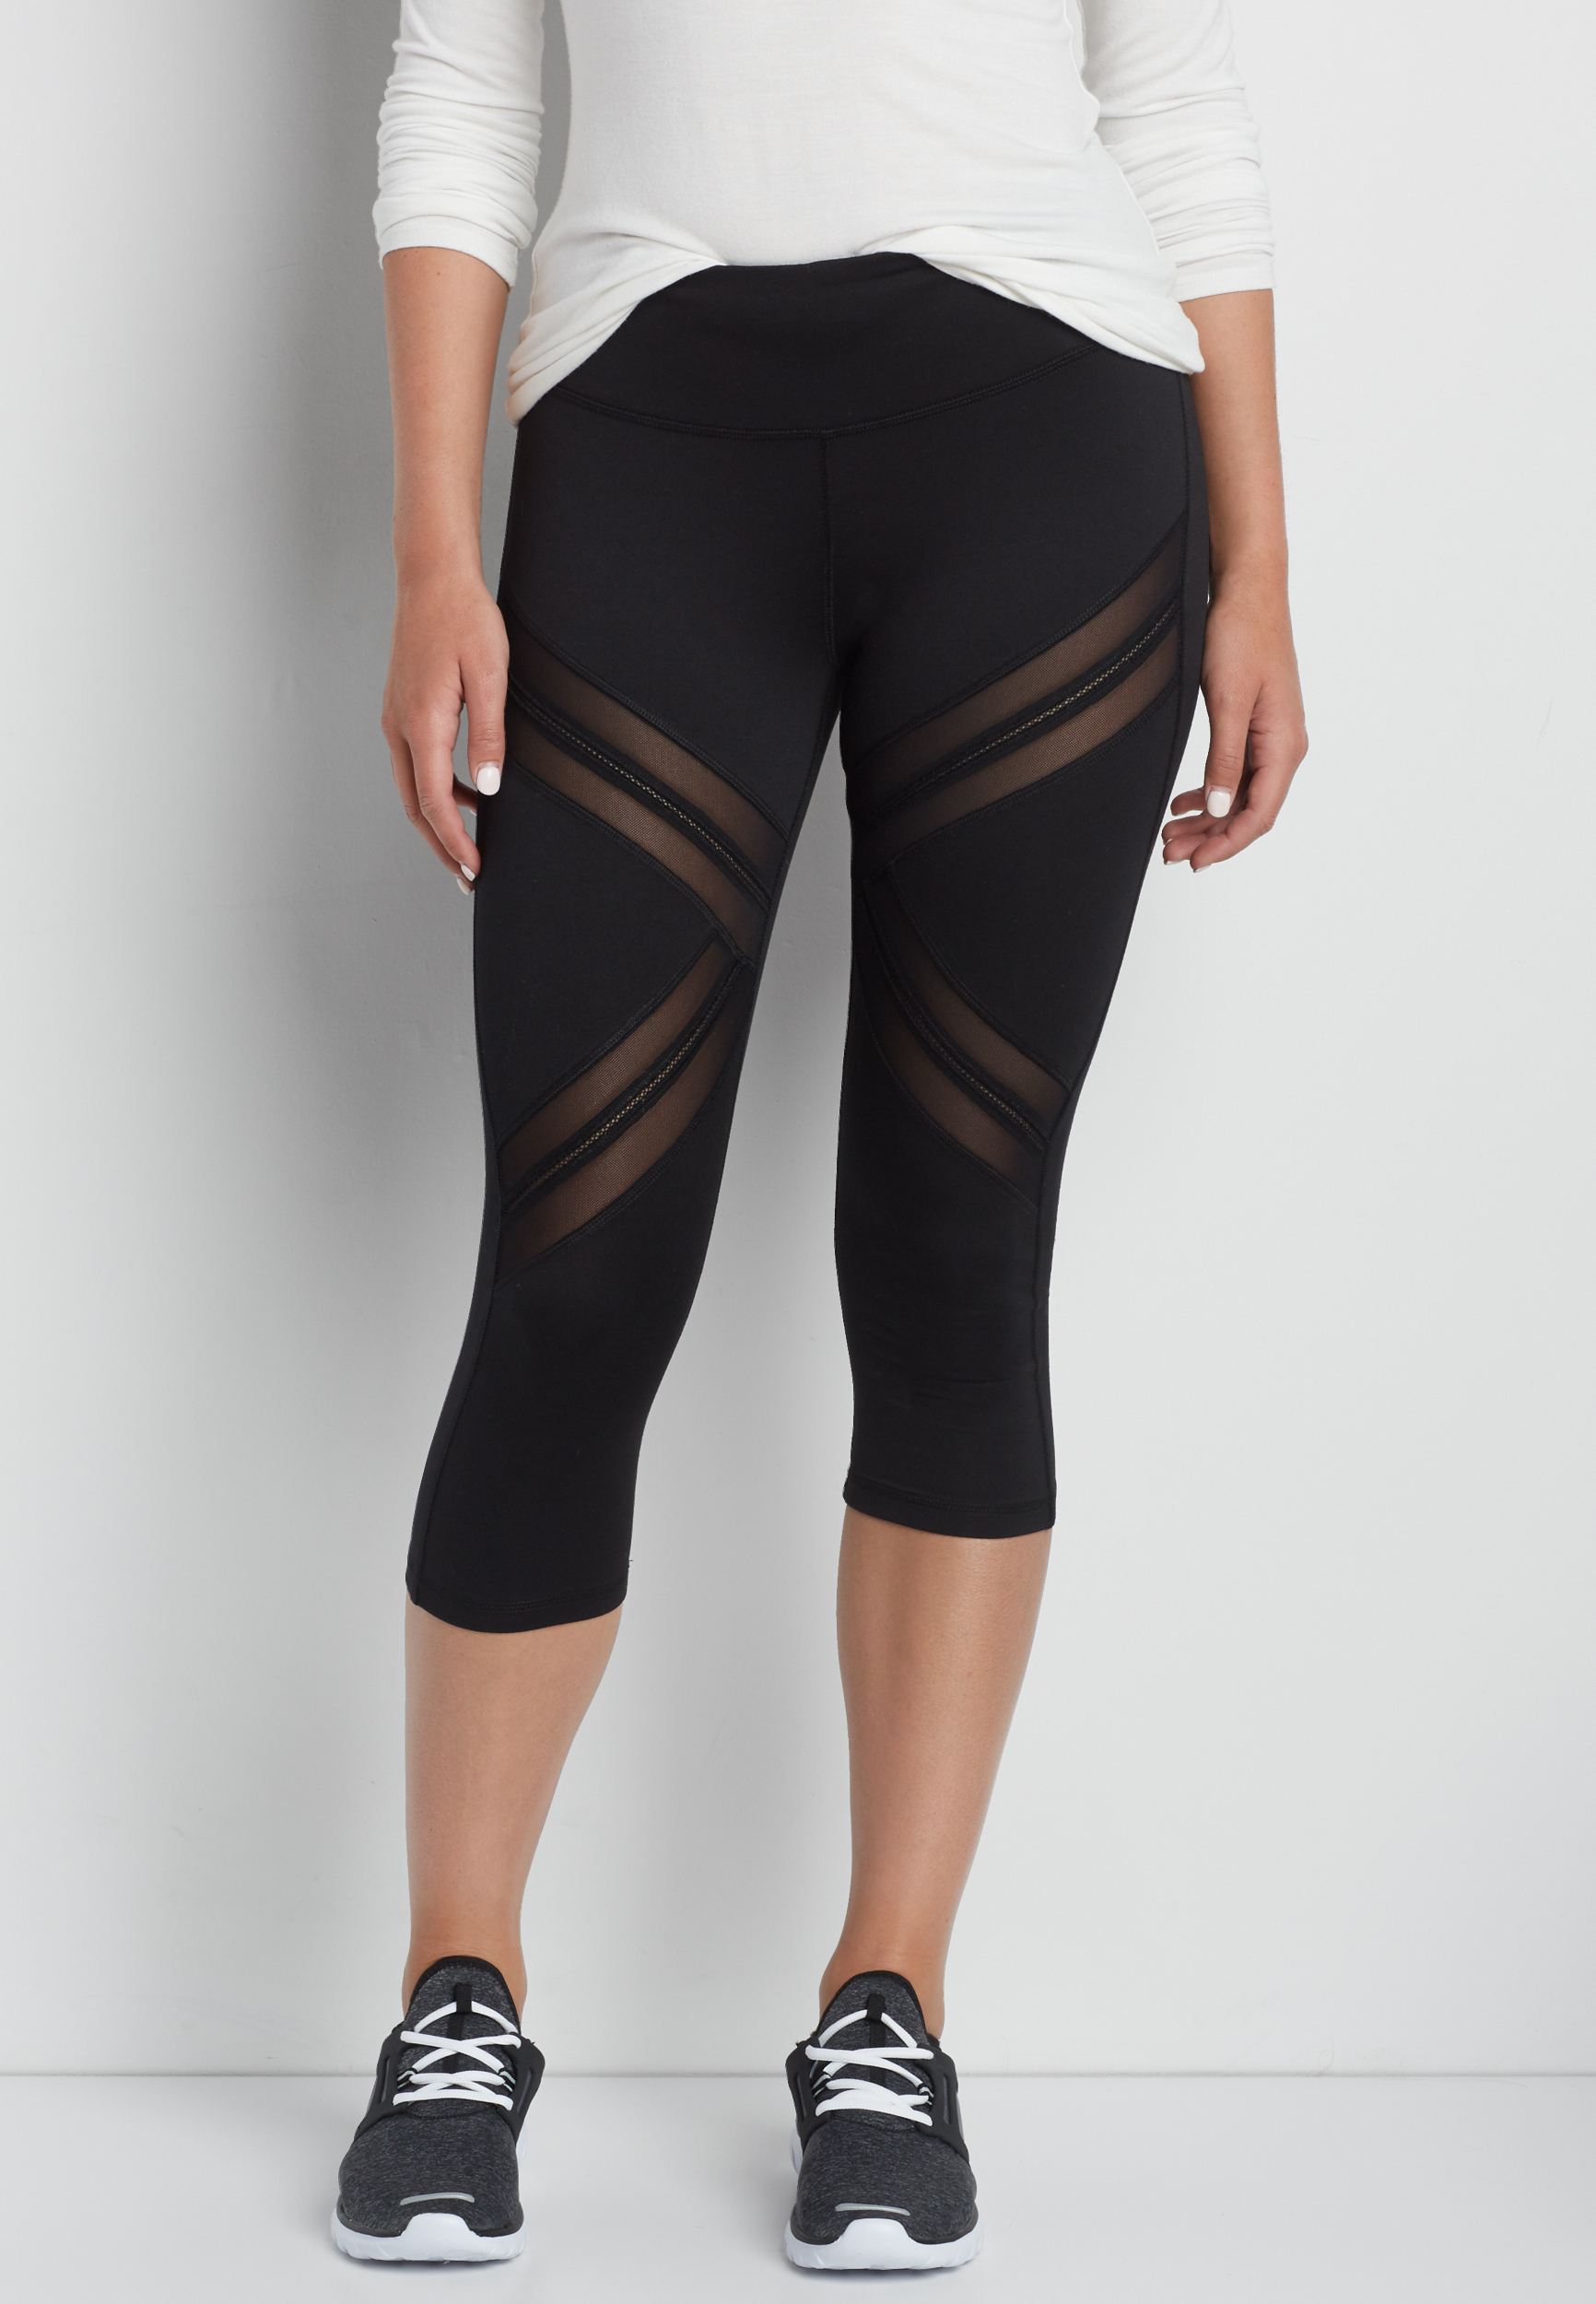 legging with patterned mesh inlay, maurices